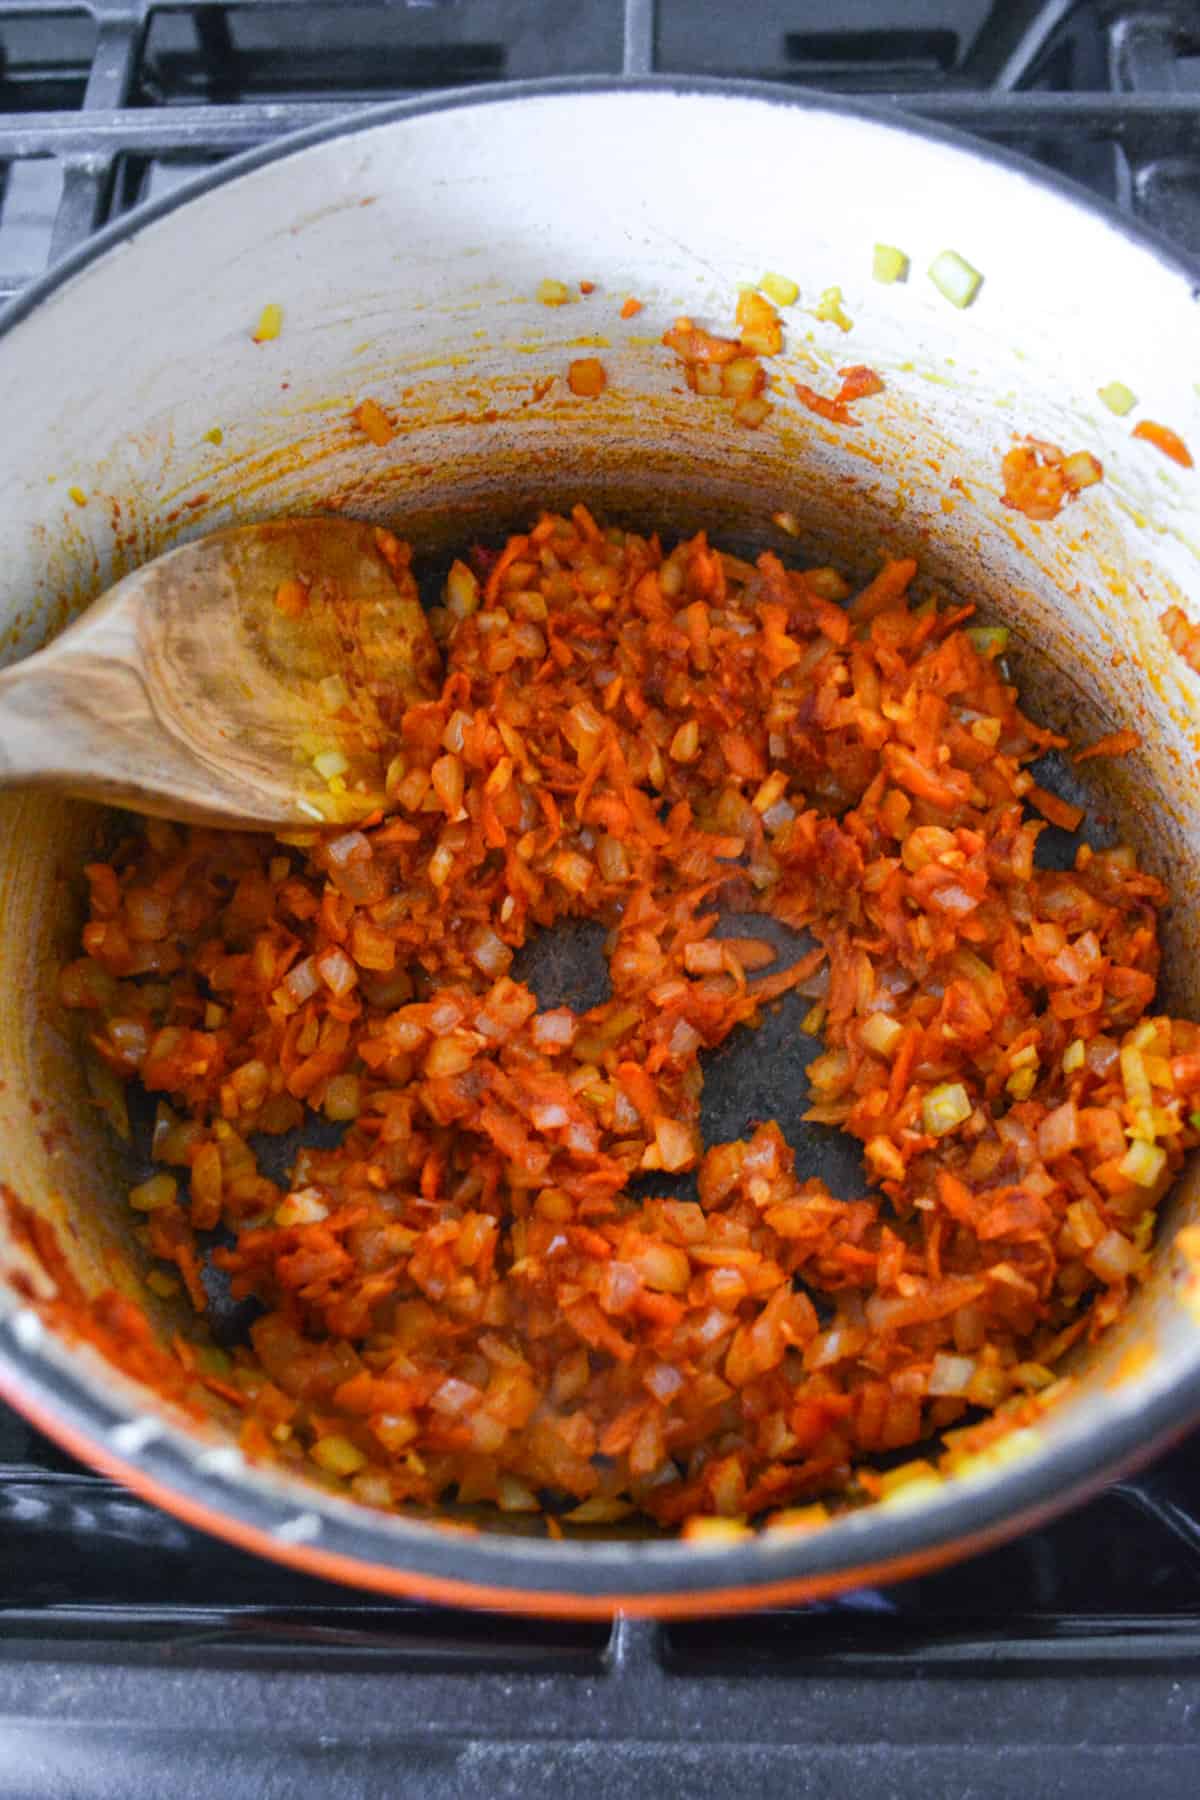 Tomato paste cooking with the onion and carrot in a pot.